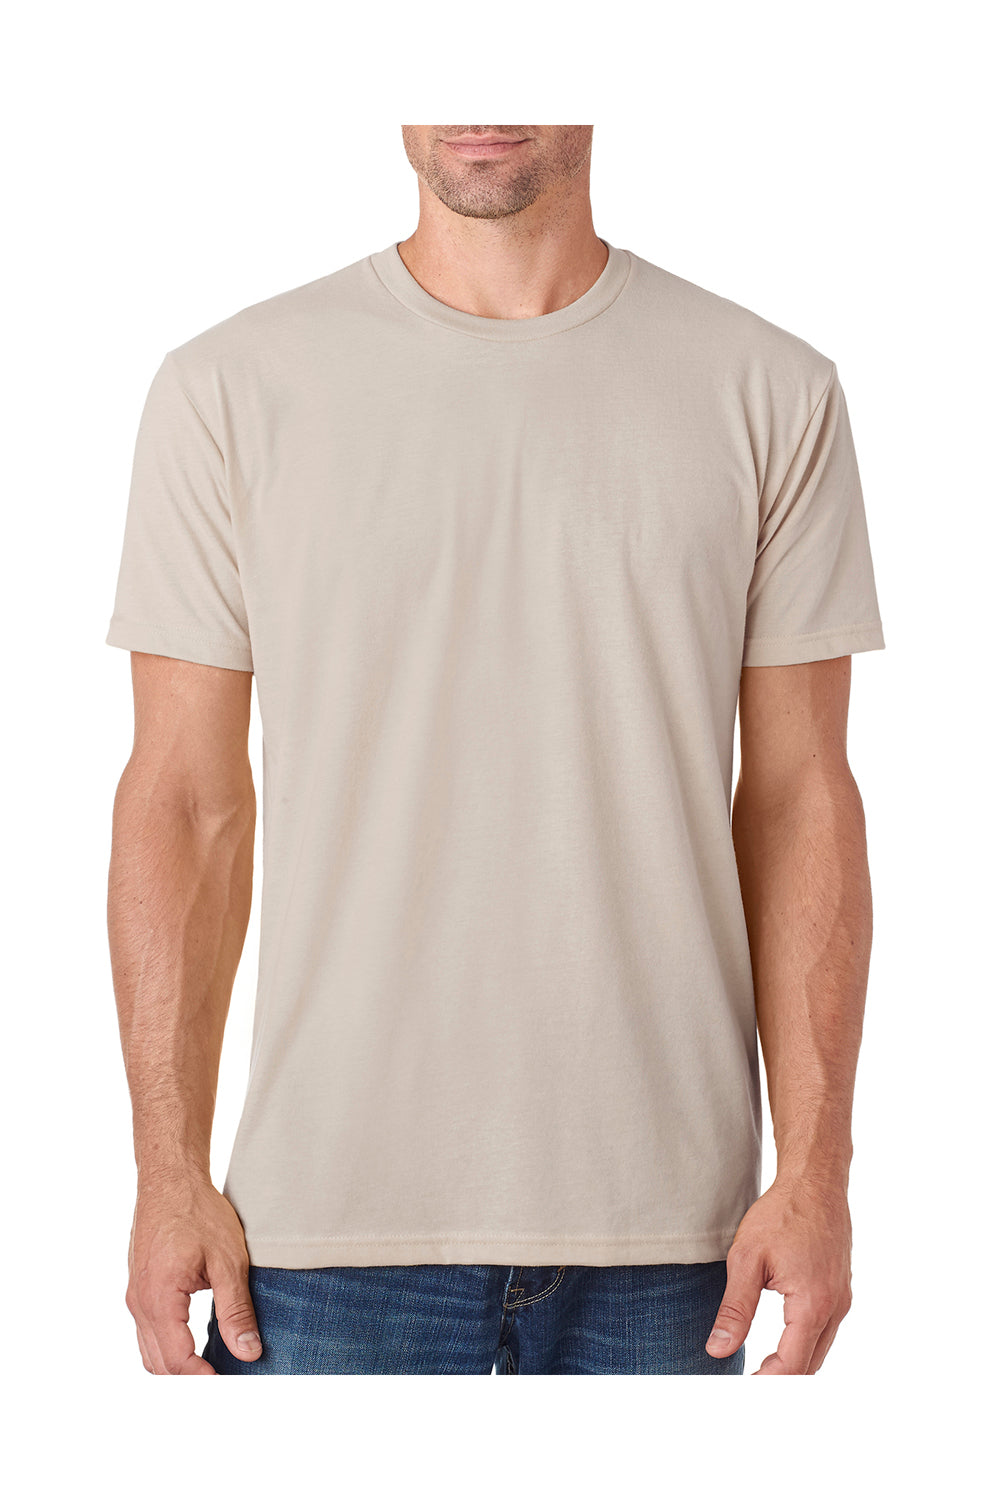 Next Level 6410 Mens Sueded Jersey Short Sleeve Crewneck T-Shirt Sand Brown Front